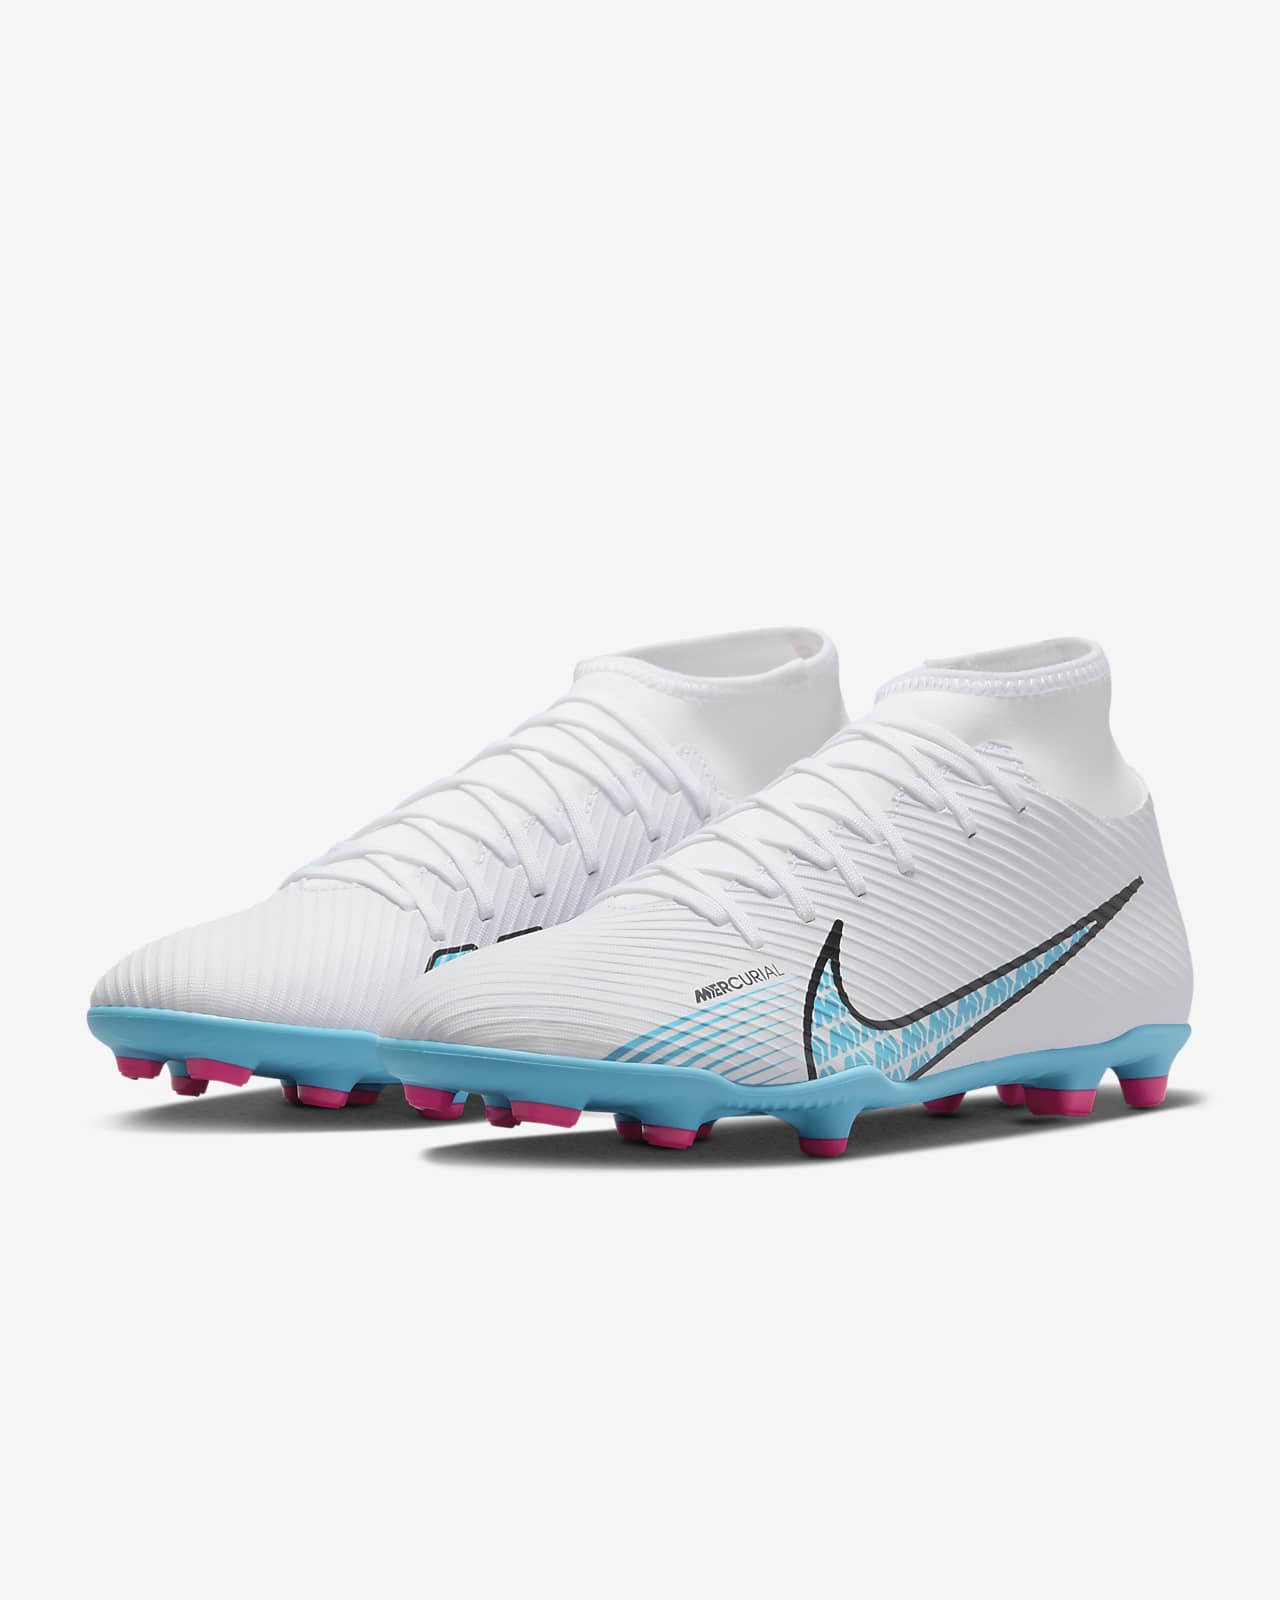 Nike Mercurial Superfly 9 Club MG Multi-Ground Soccer Cleats. 